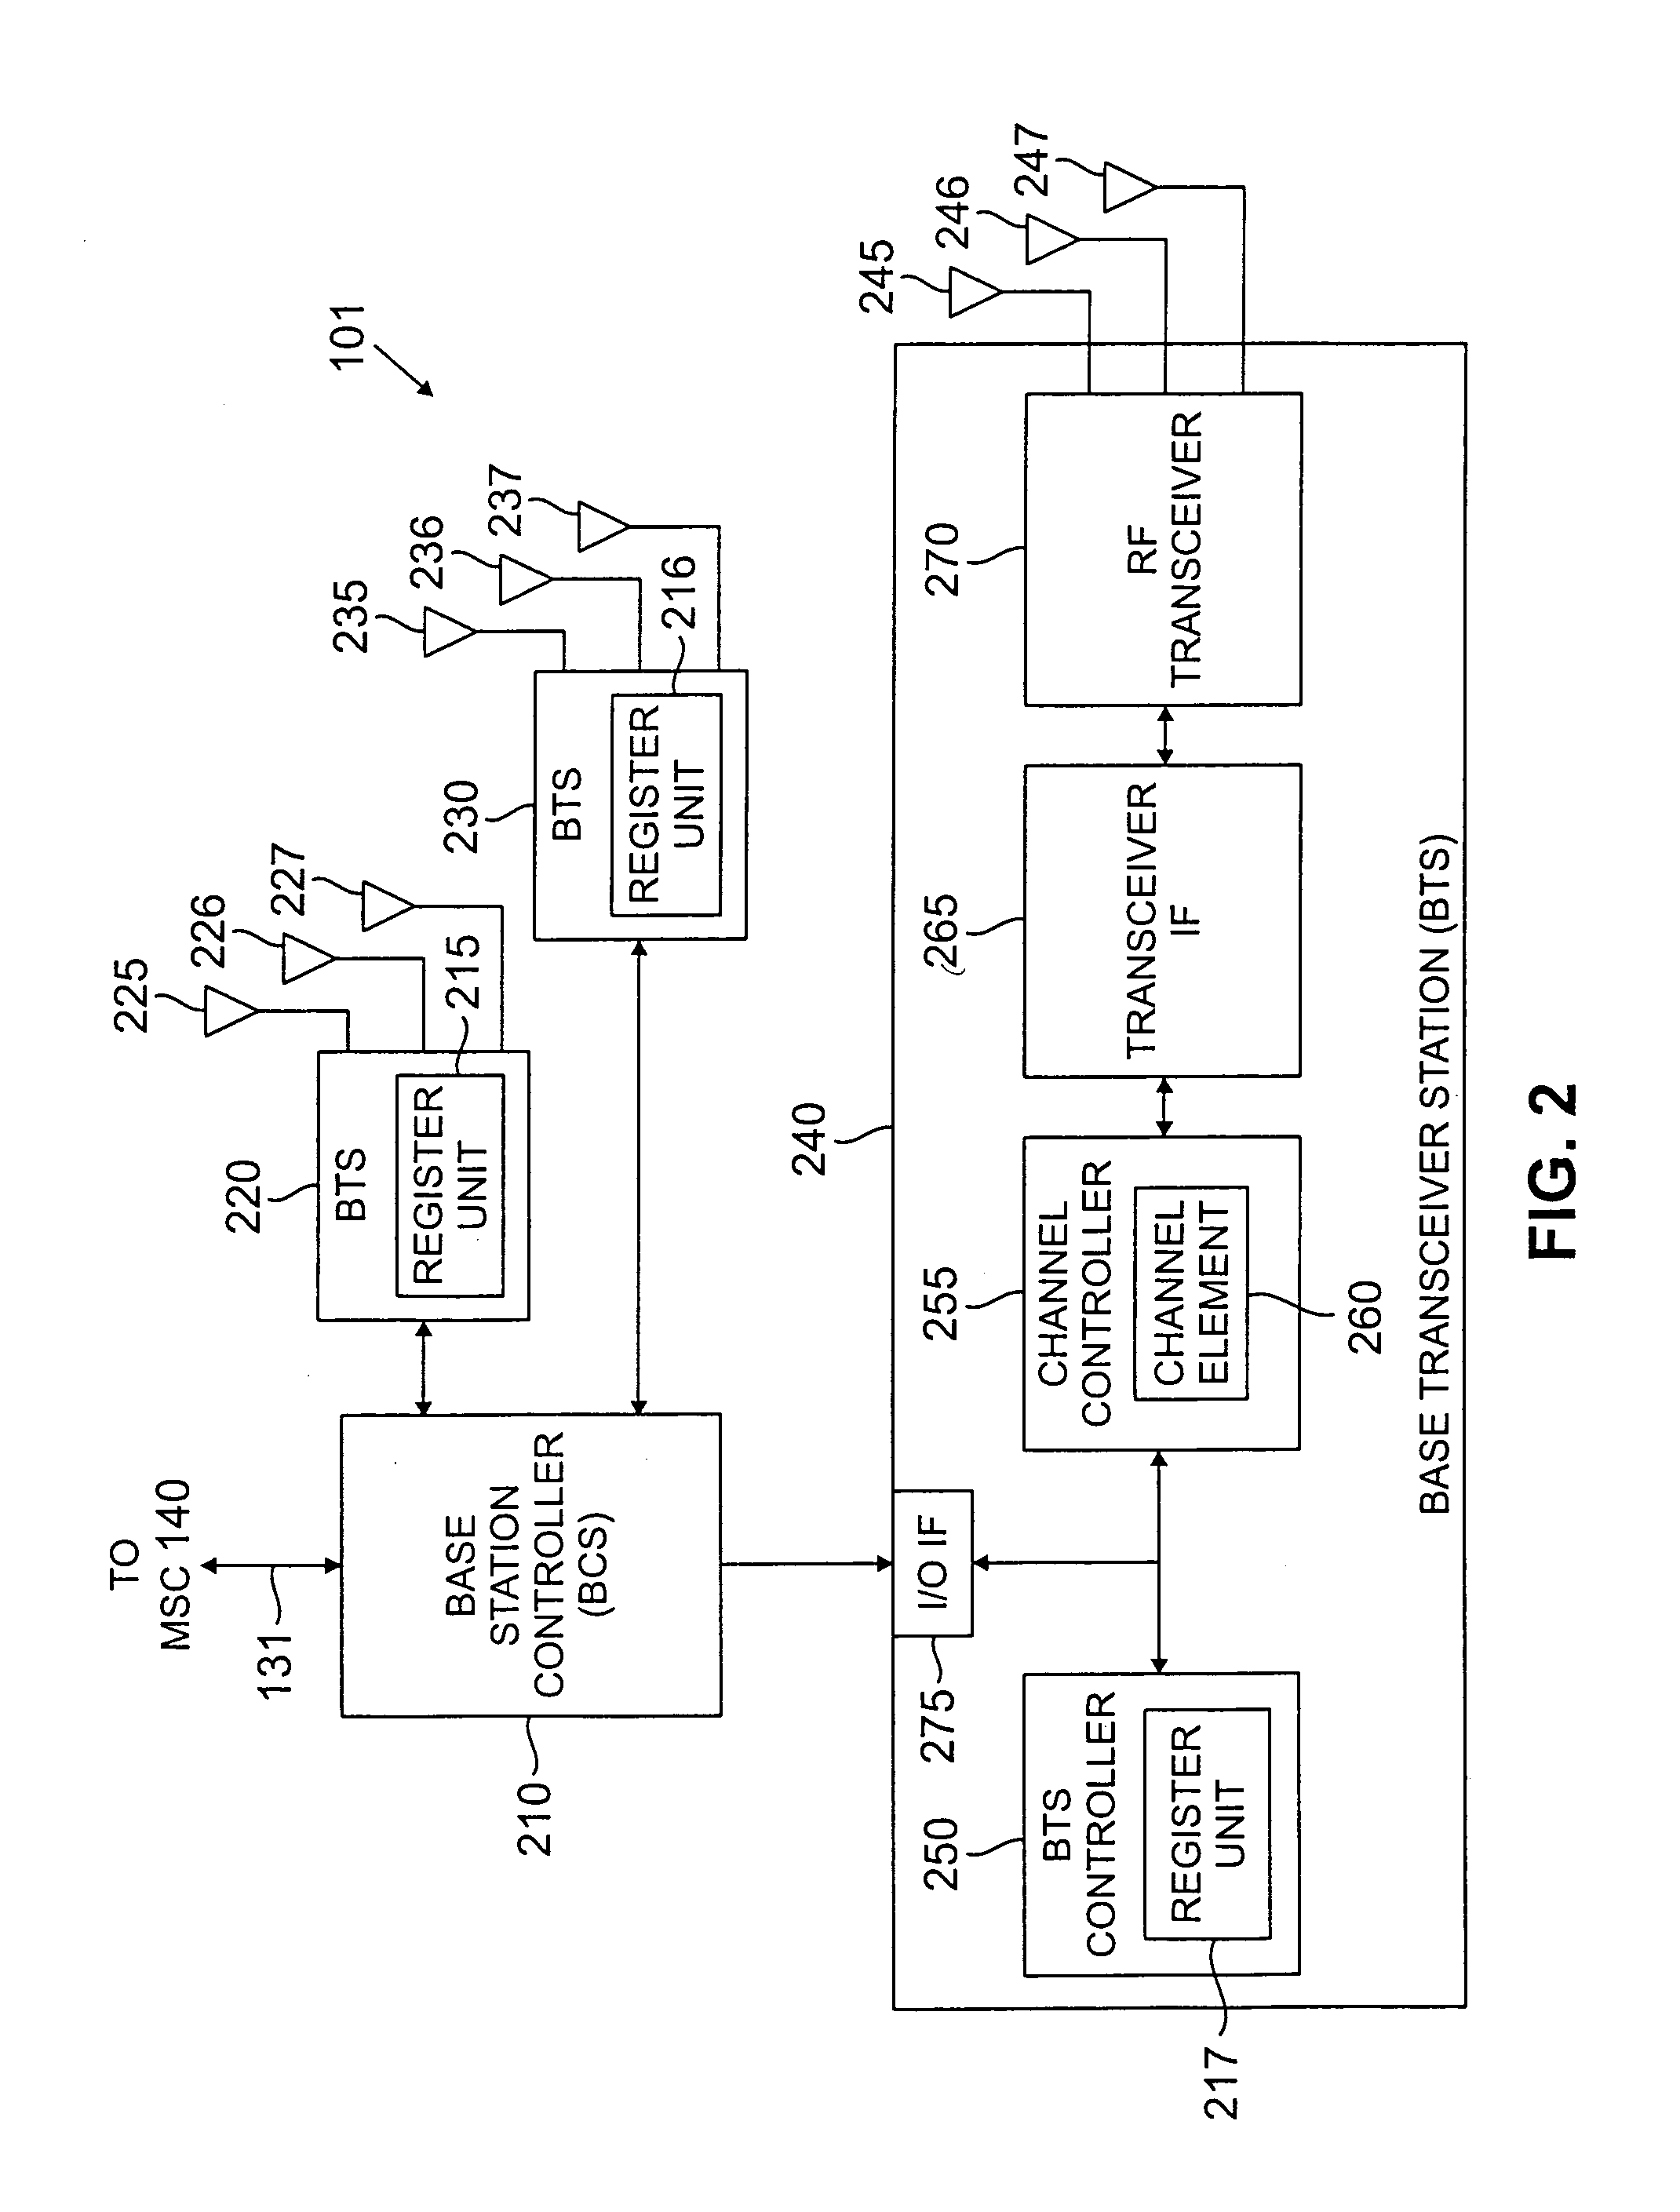 System and method for providing concurrent data transmissions in a wireless communication network